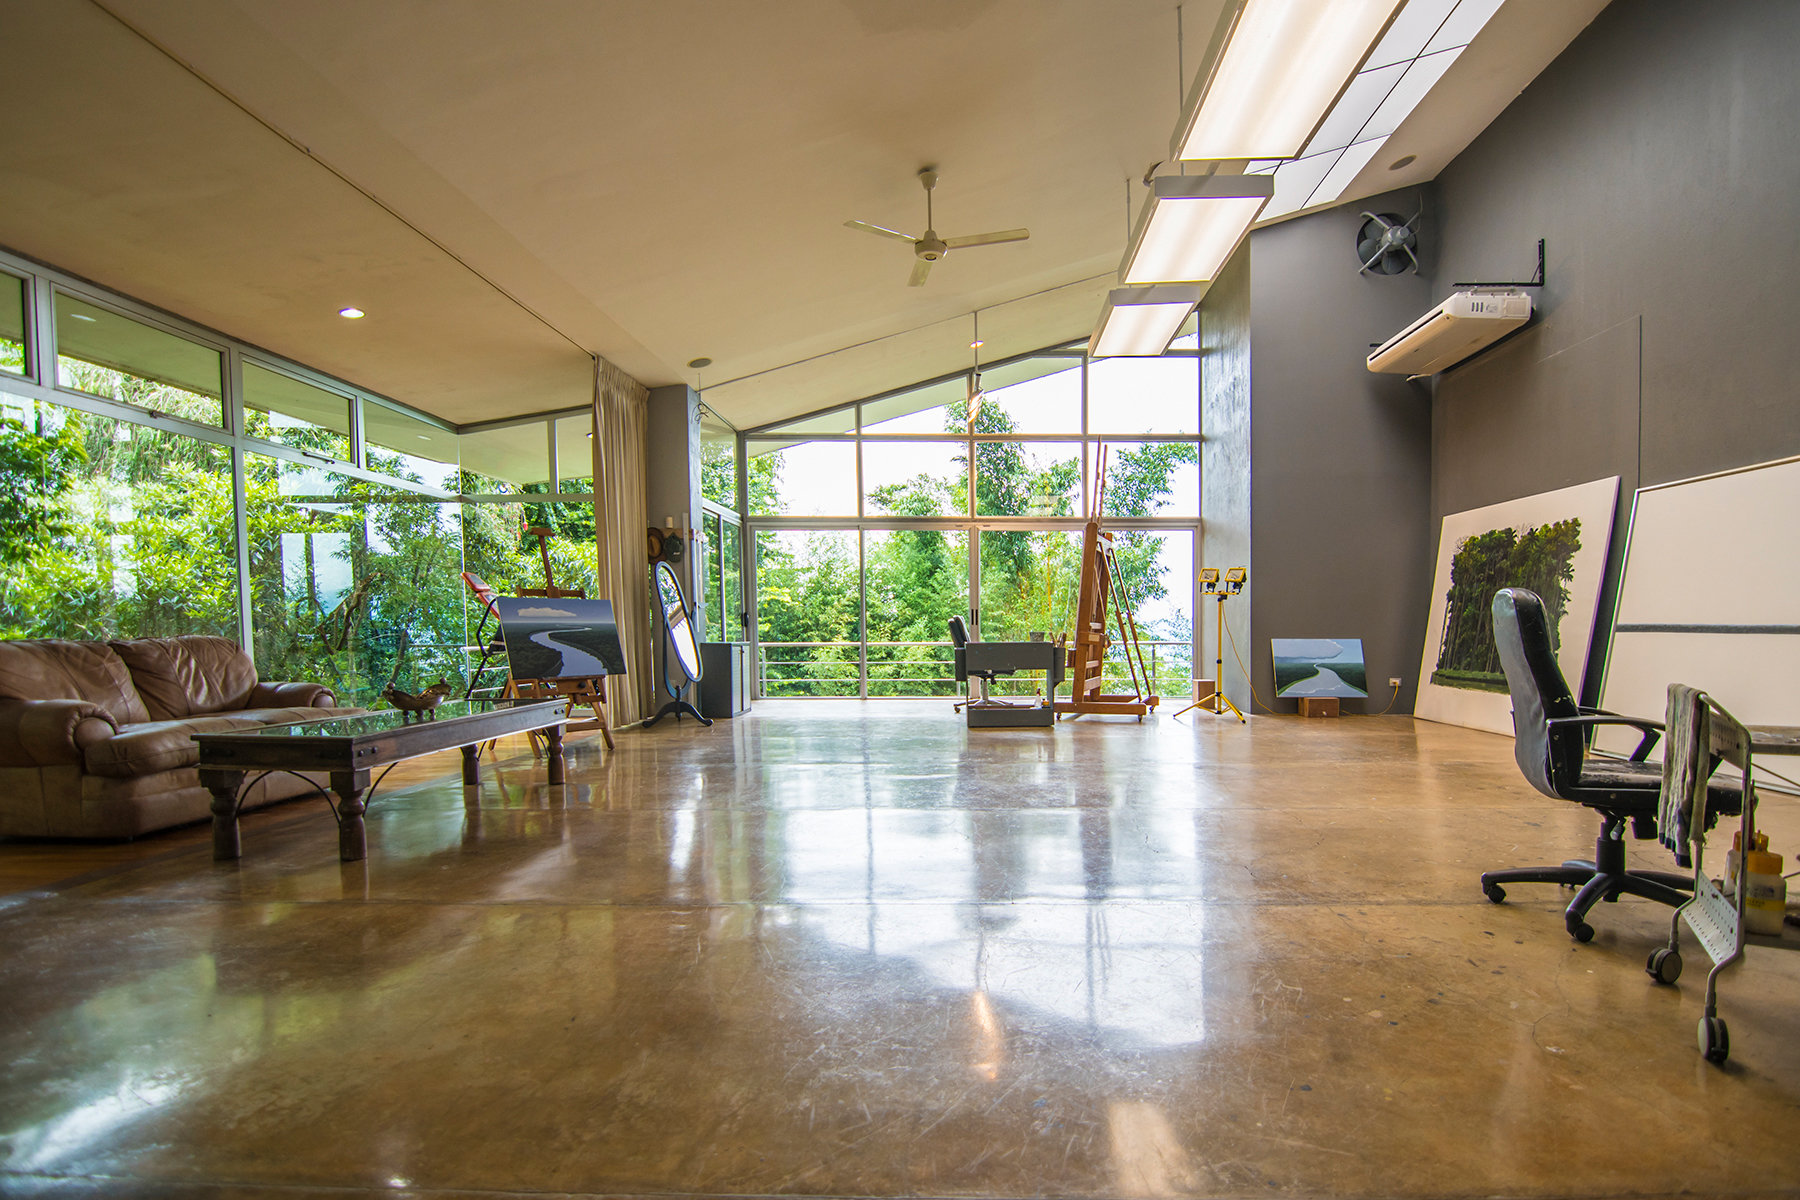 House Hunting in Costa Rica: AnArtist’s Haven in the Mountains - 포토뉴스